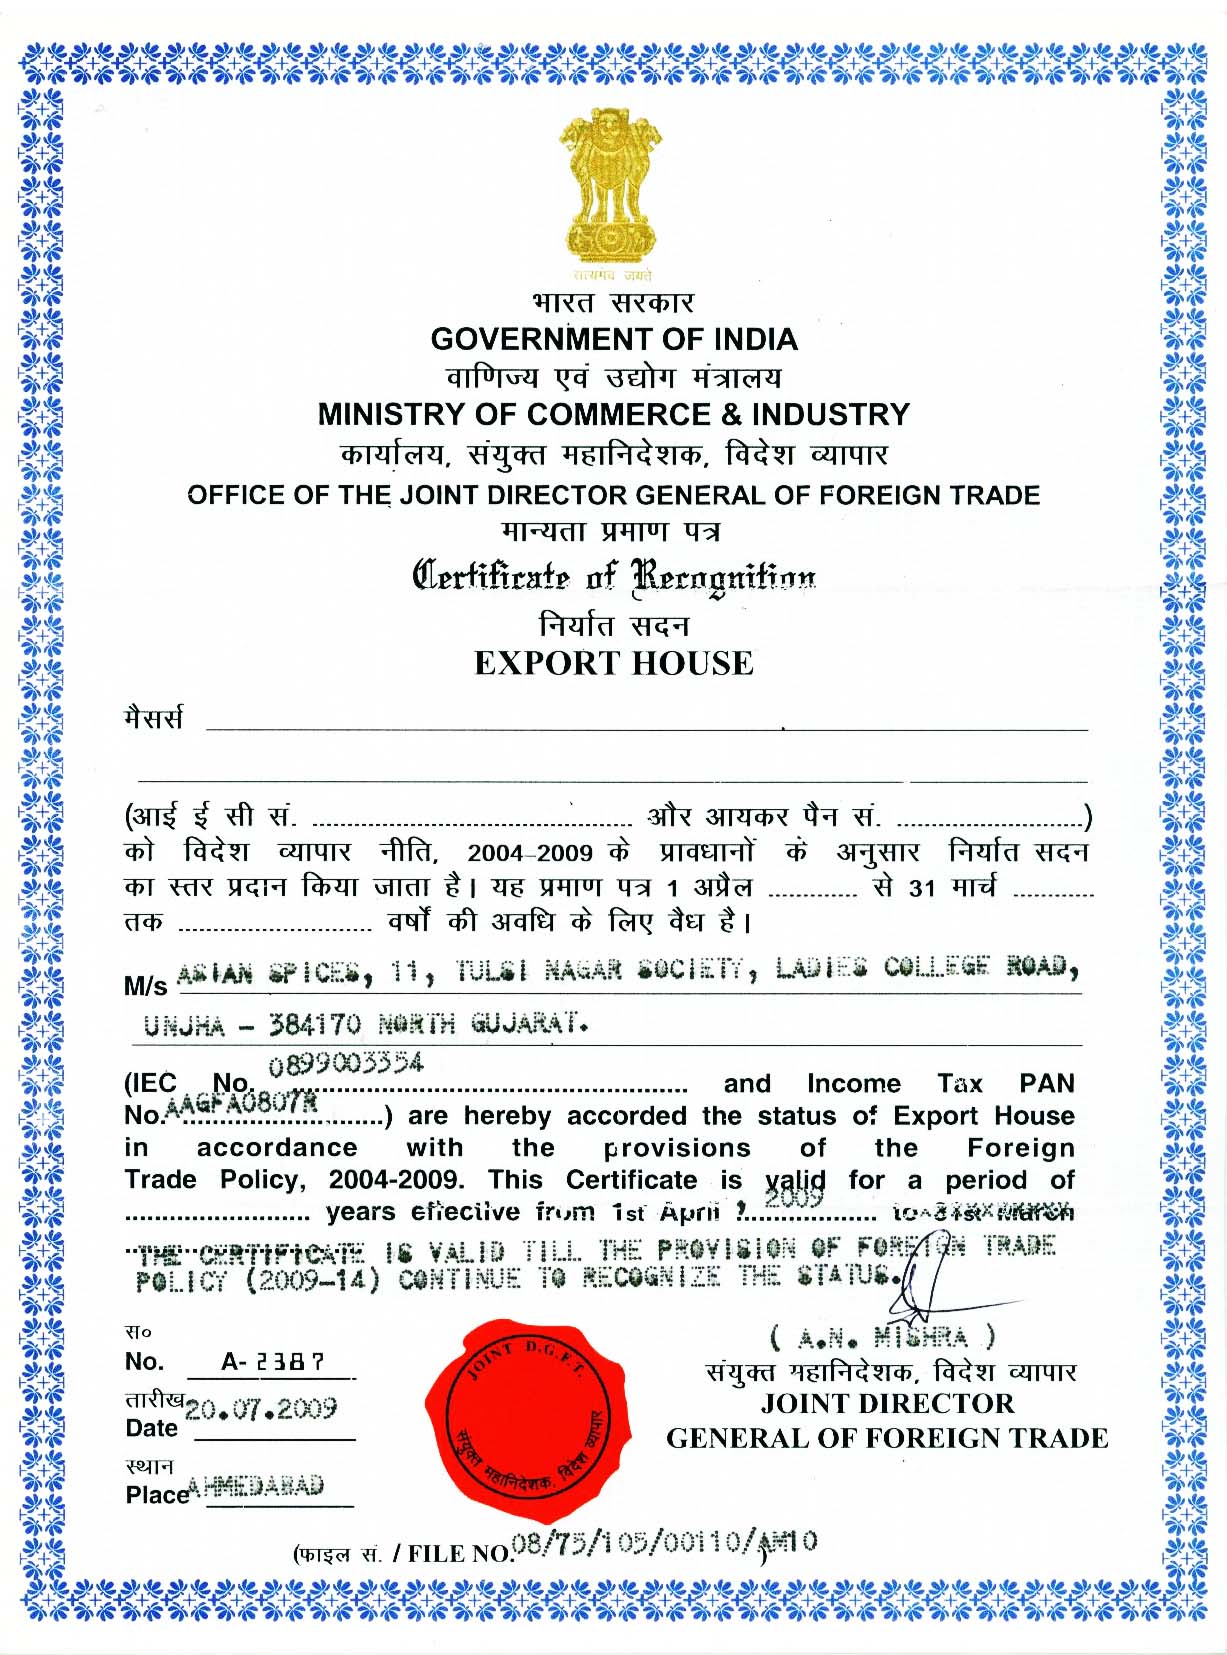 isocertificate